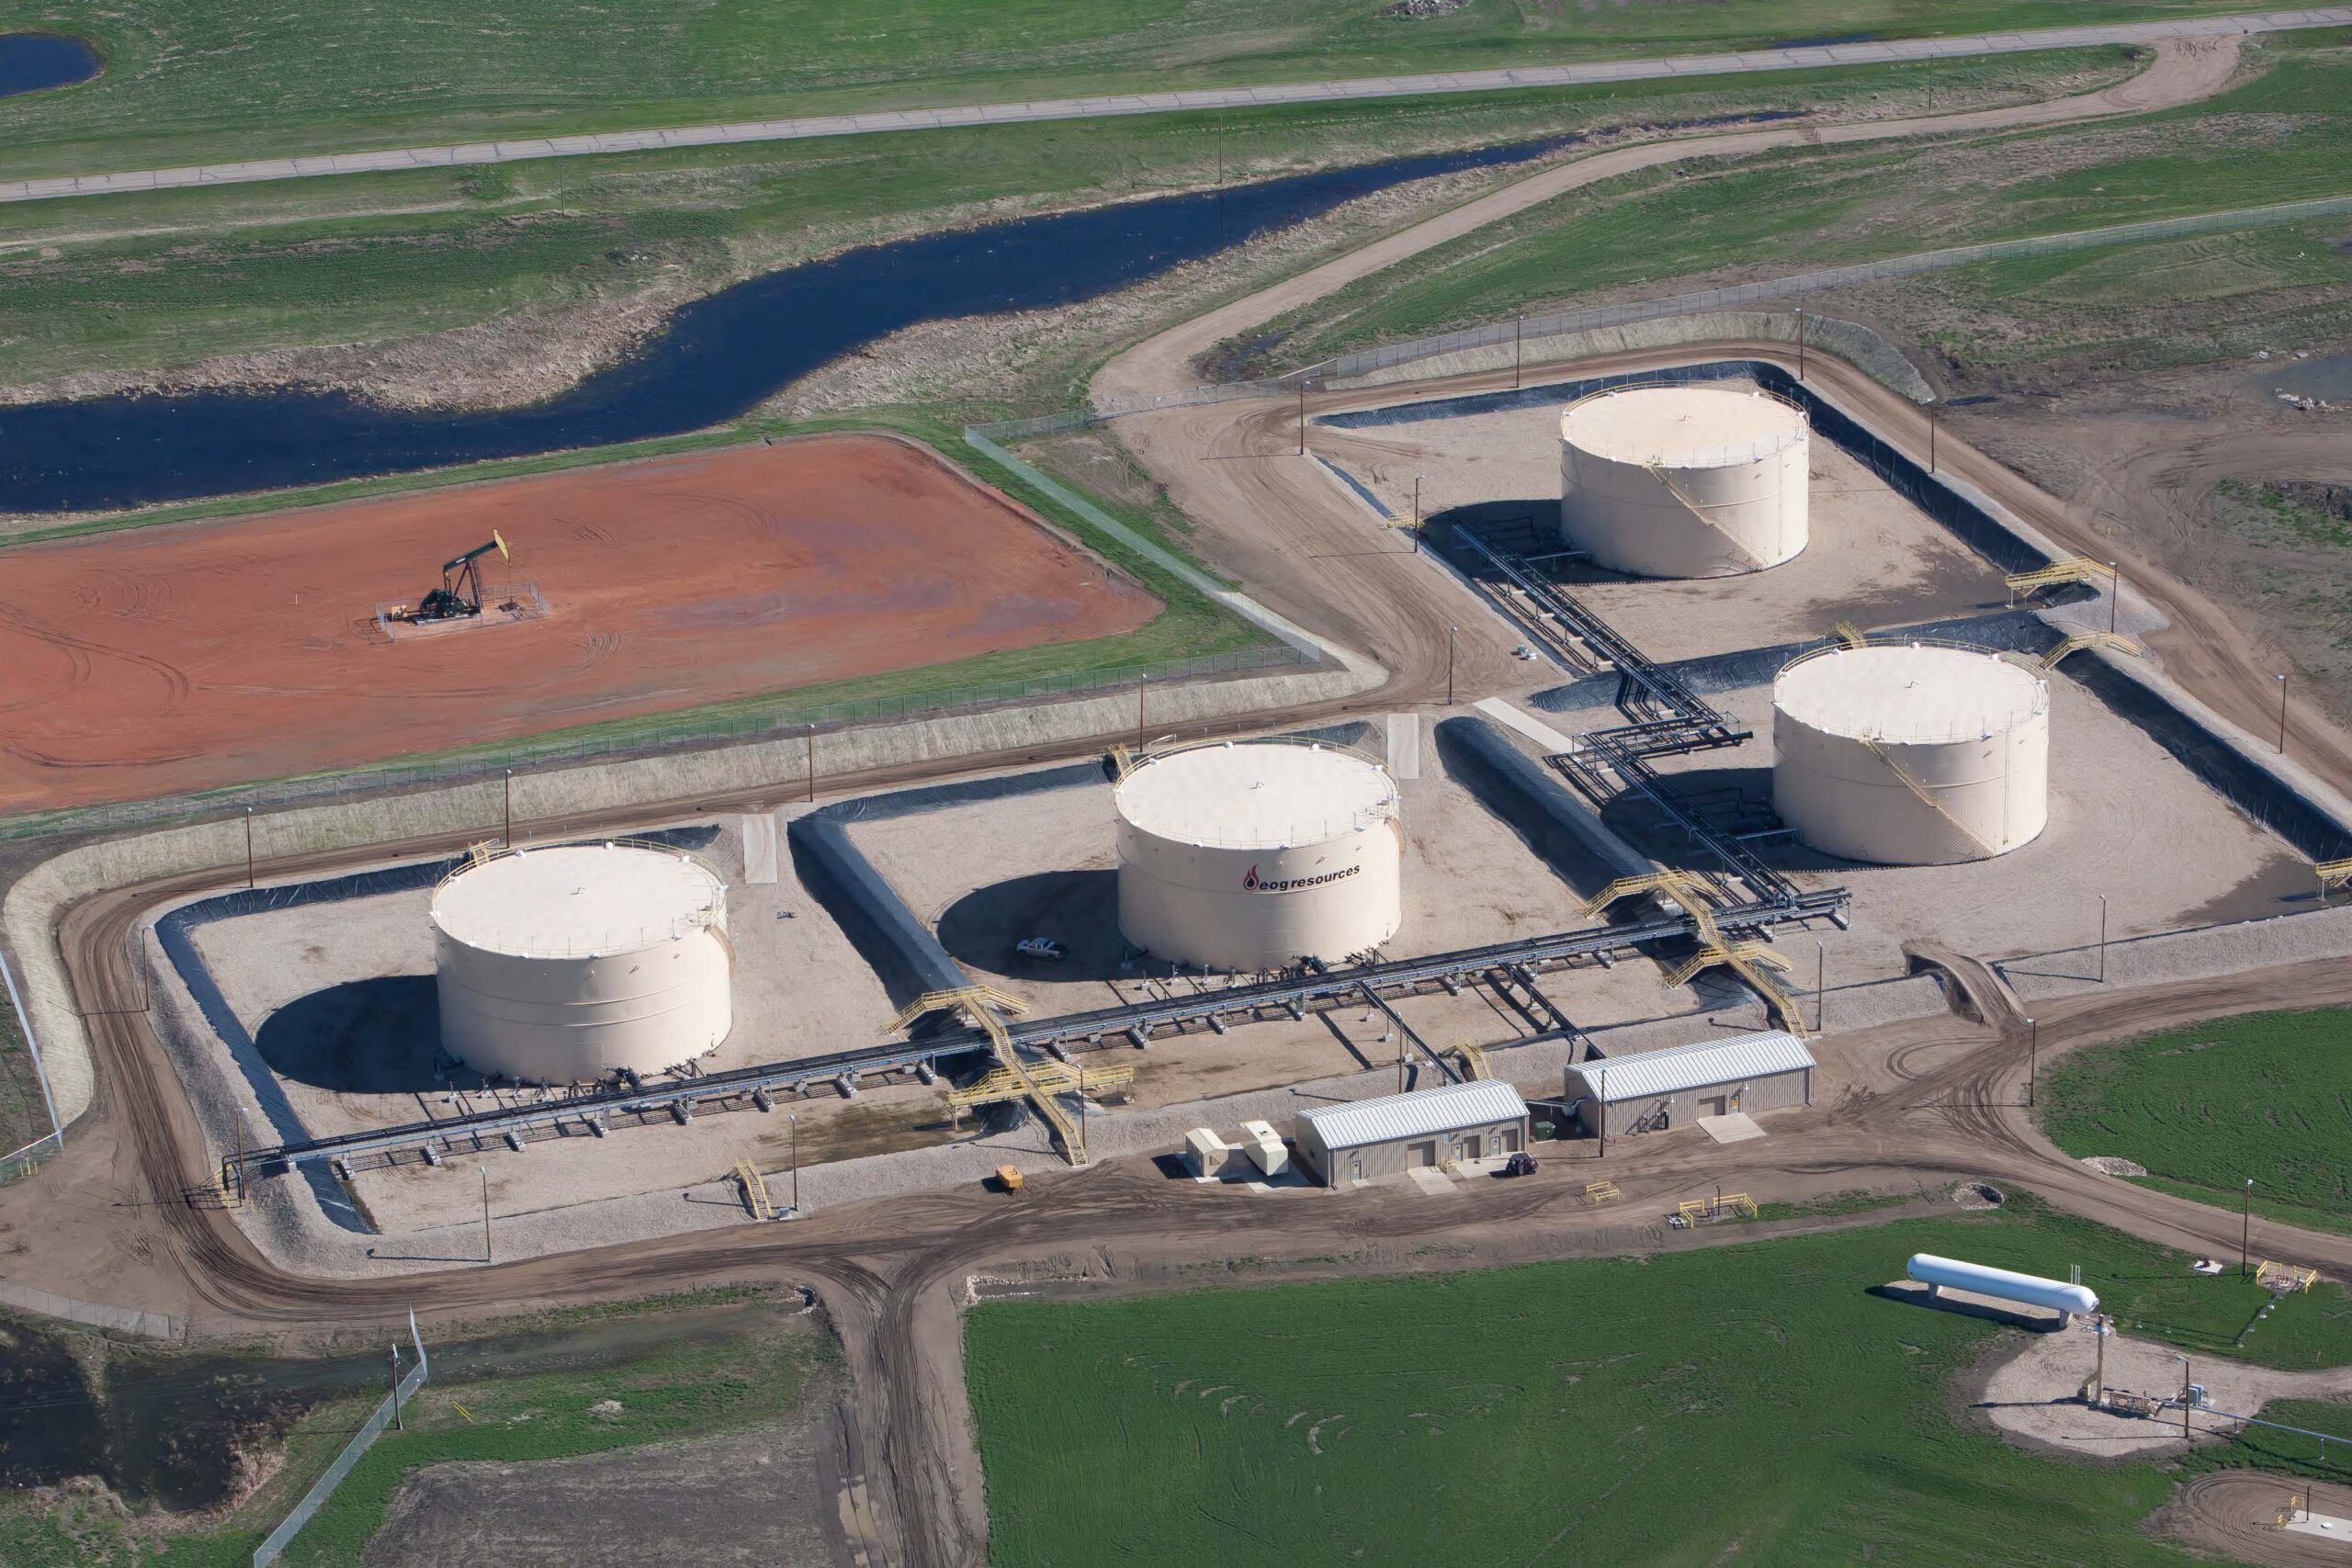 Crude oil storage tanks at the EOG Resources, Inc. Facility in Stanley, ND.